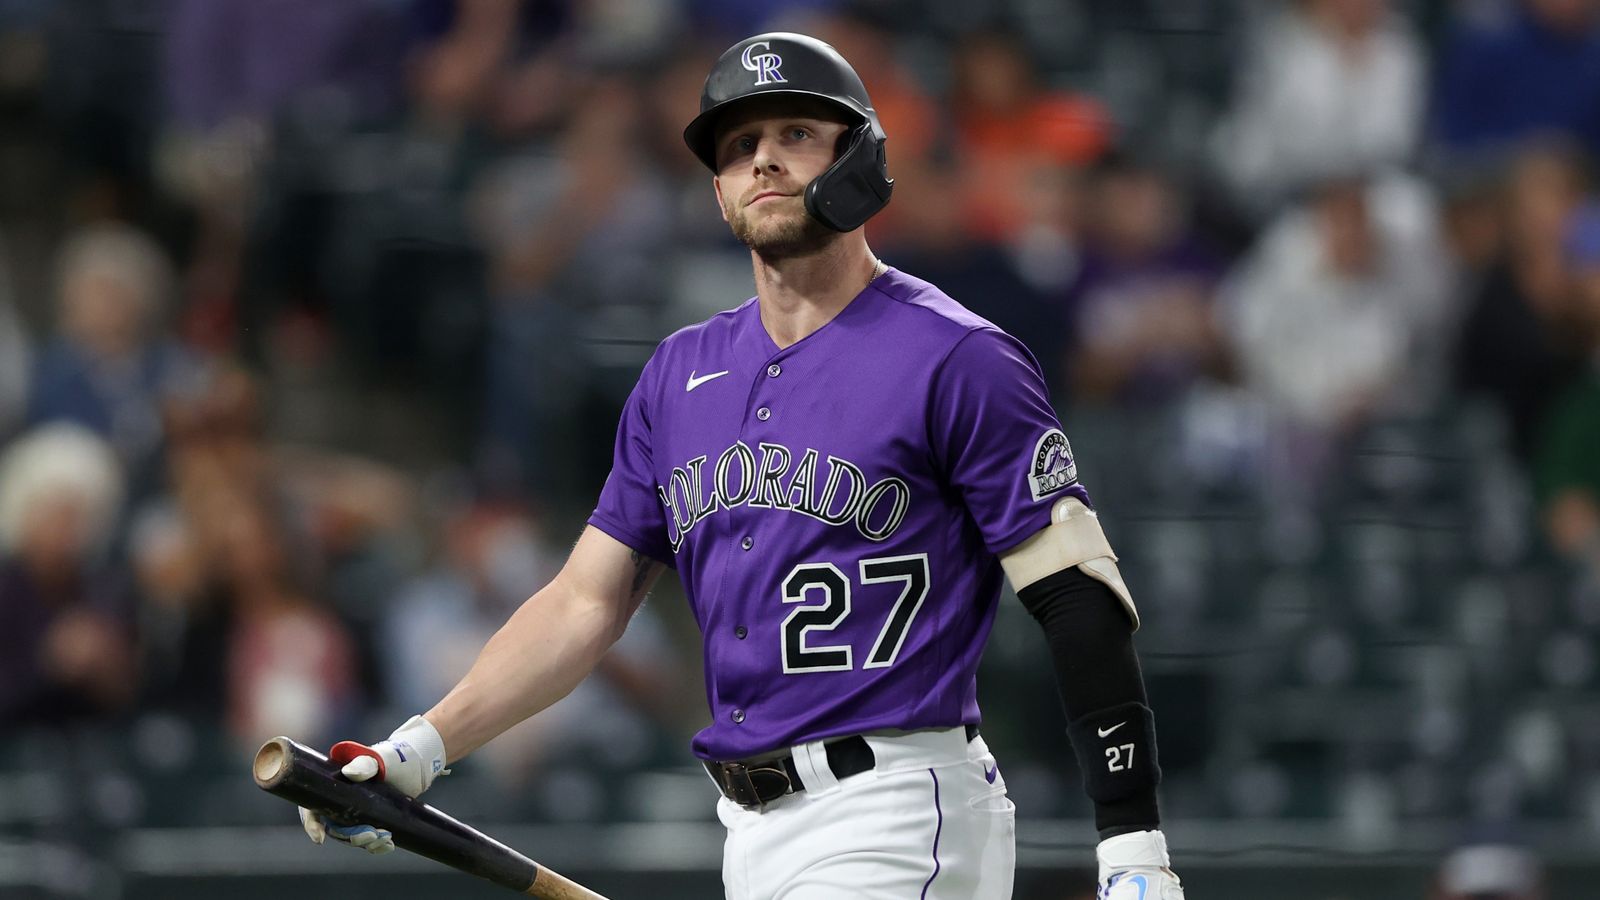 McAdam: How well would Trevor Story fit with Red Sox?